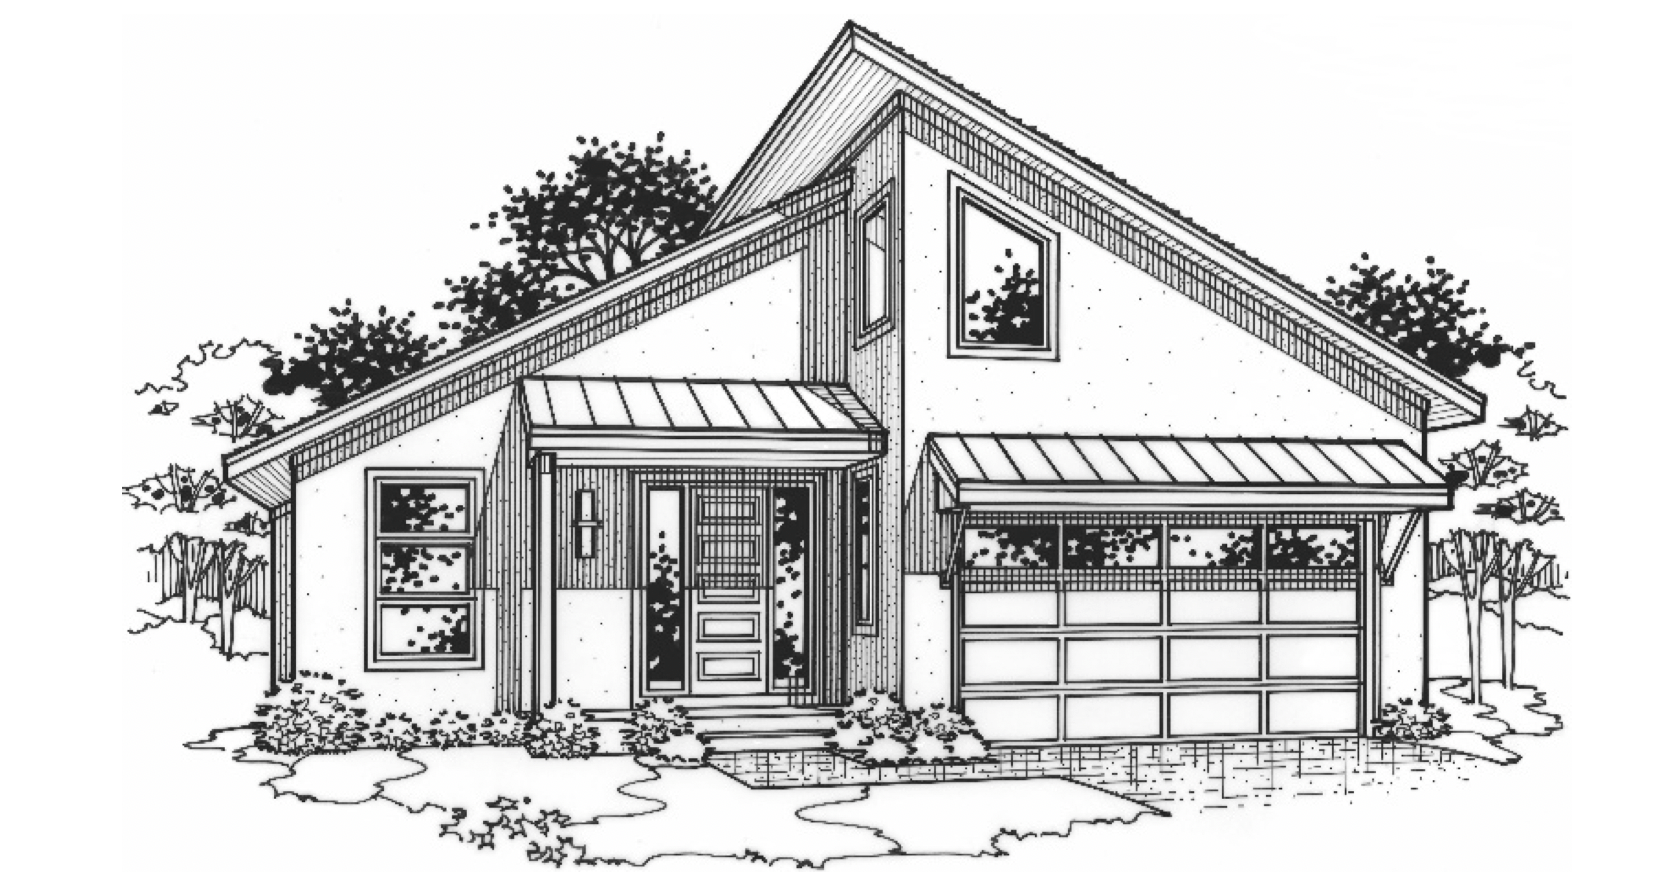 Black and white front elevation of the Wisteria model from Lambie Homes